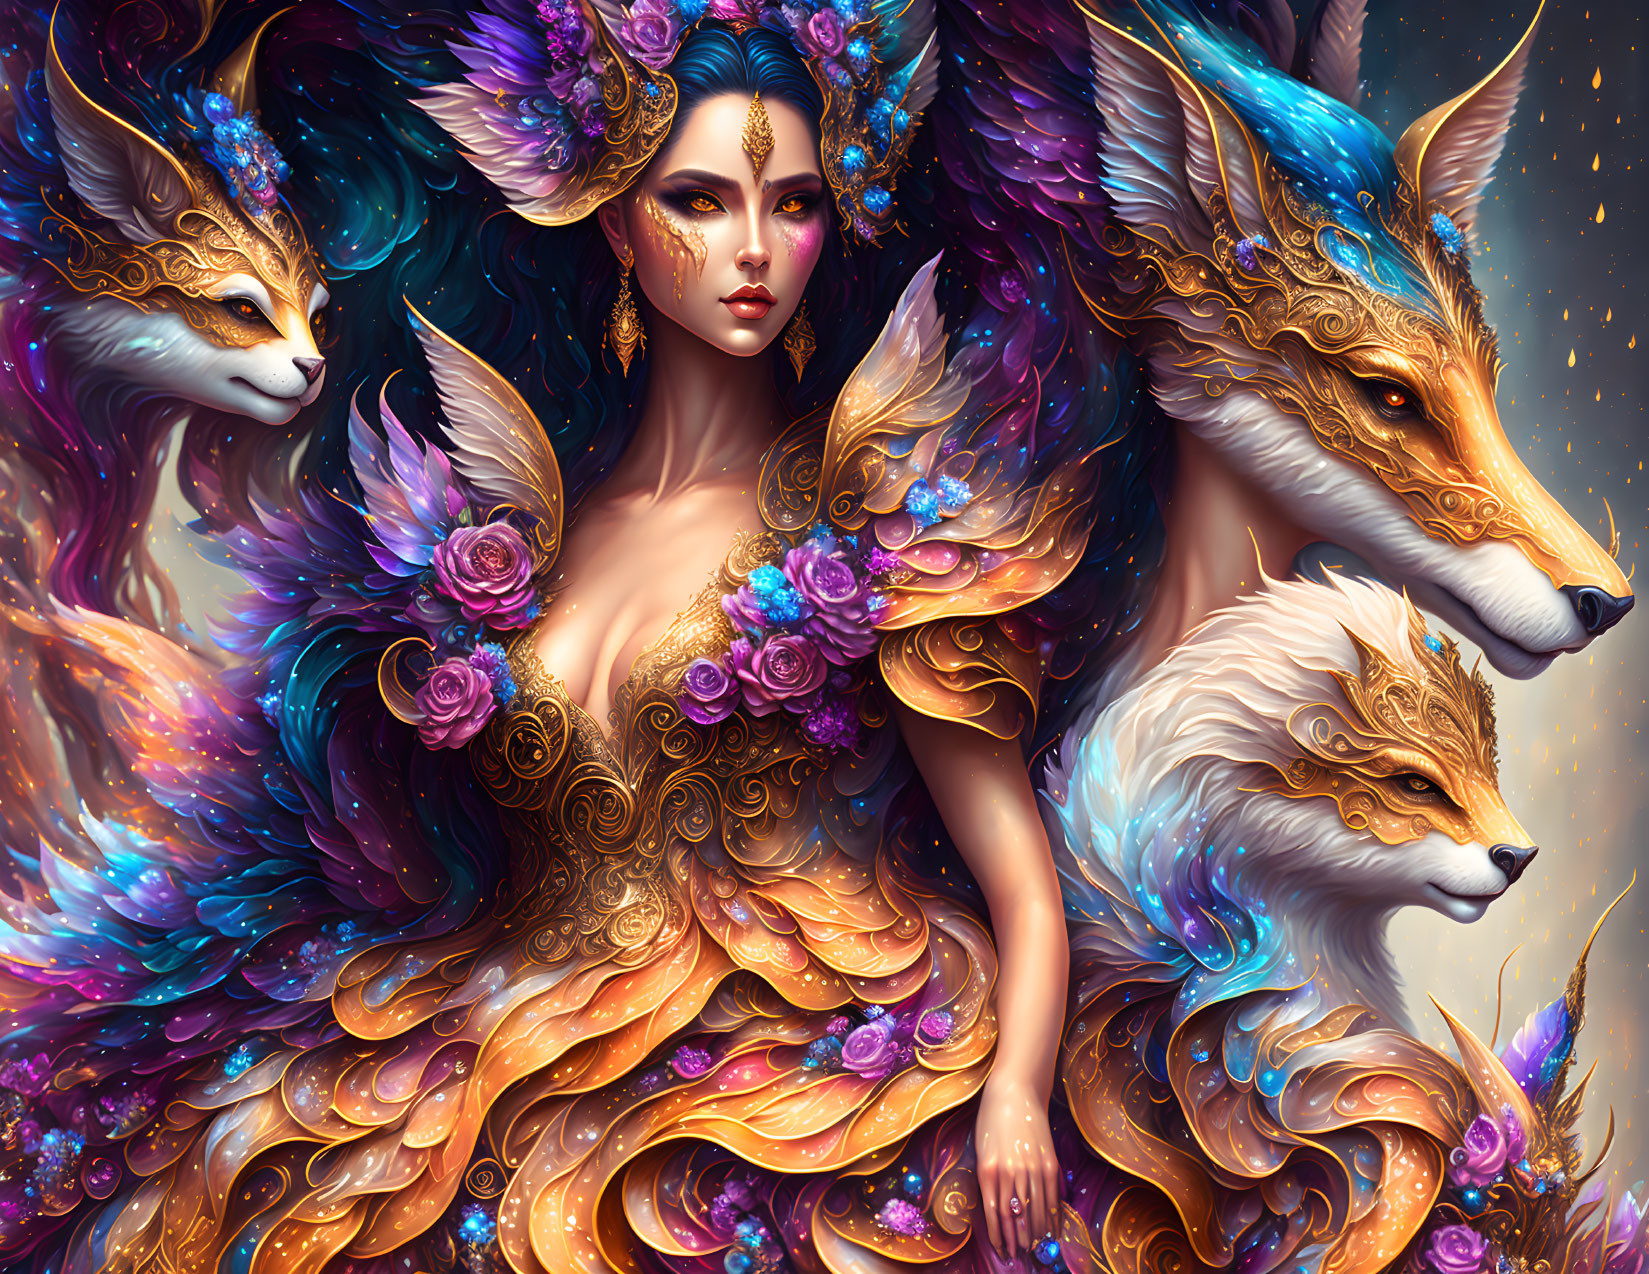 Ethereal woman with fox-like creatures in cosmic setting